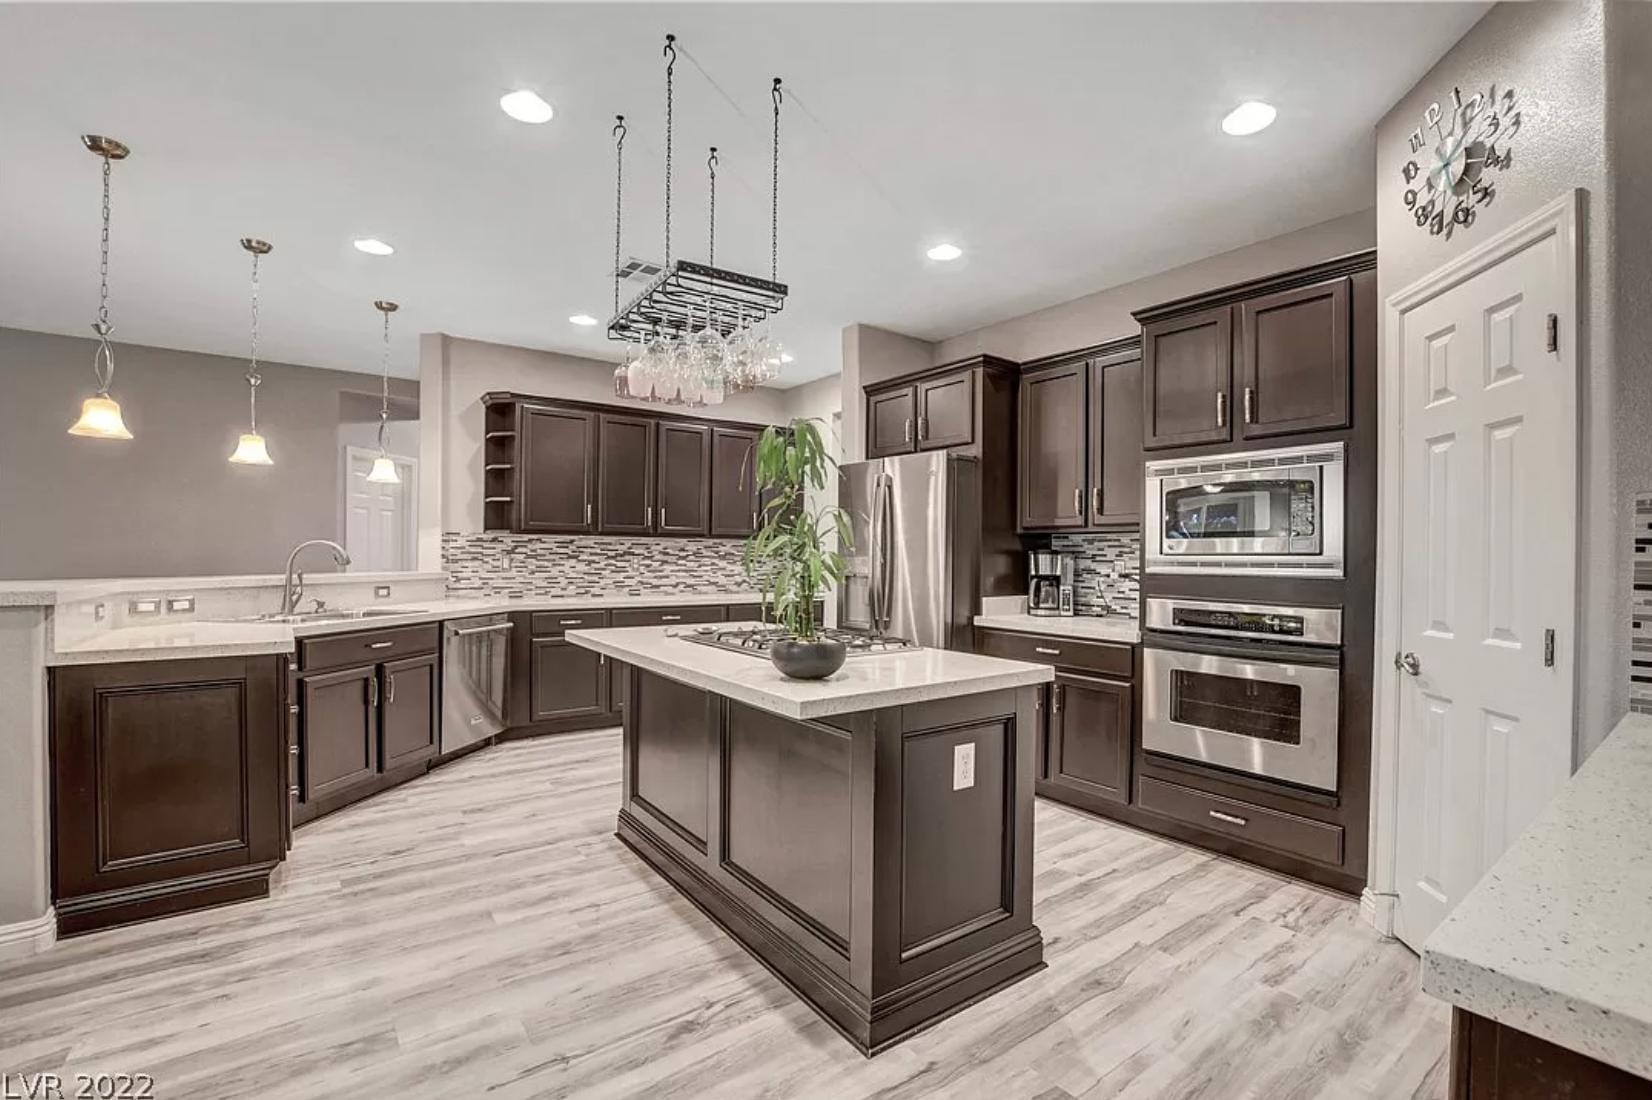 A modern kitchen in shades of gray with stainless steel appliances, dark cabinetry, and quartz countertops